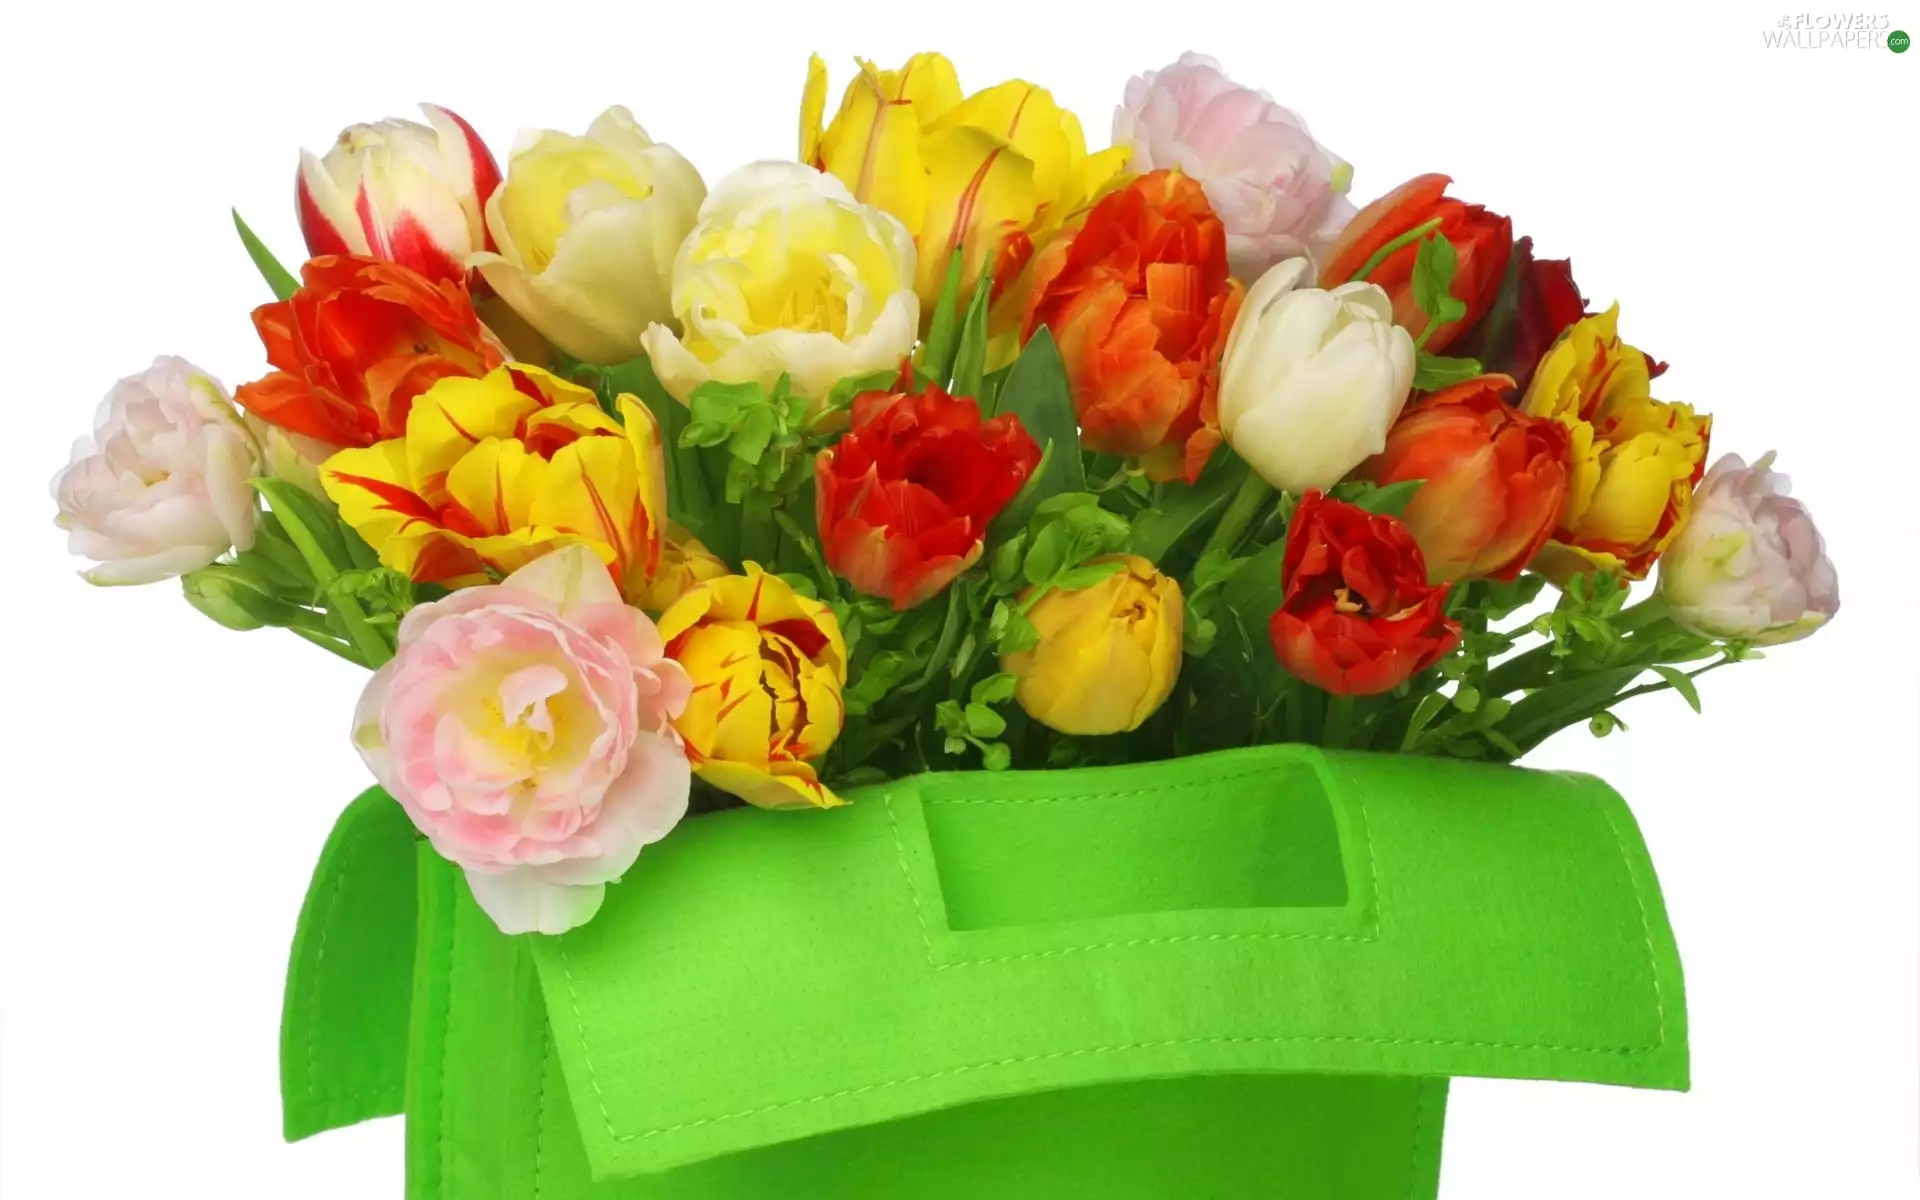 Green, color, Tulips, bag